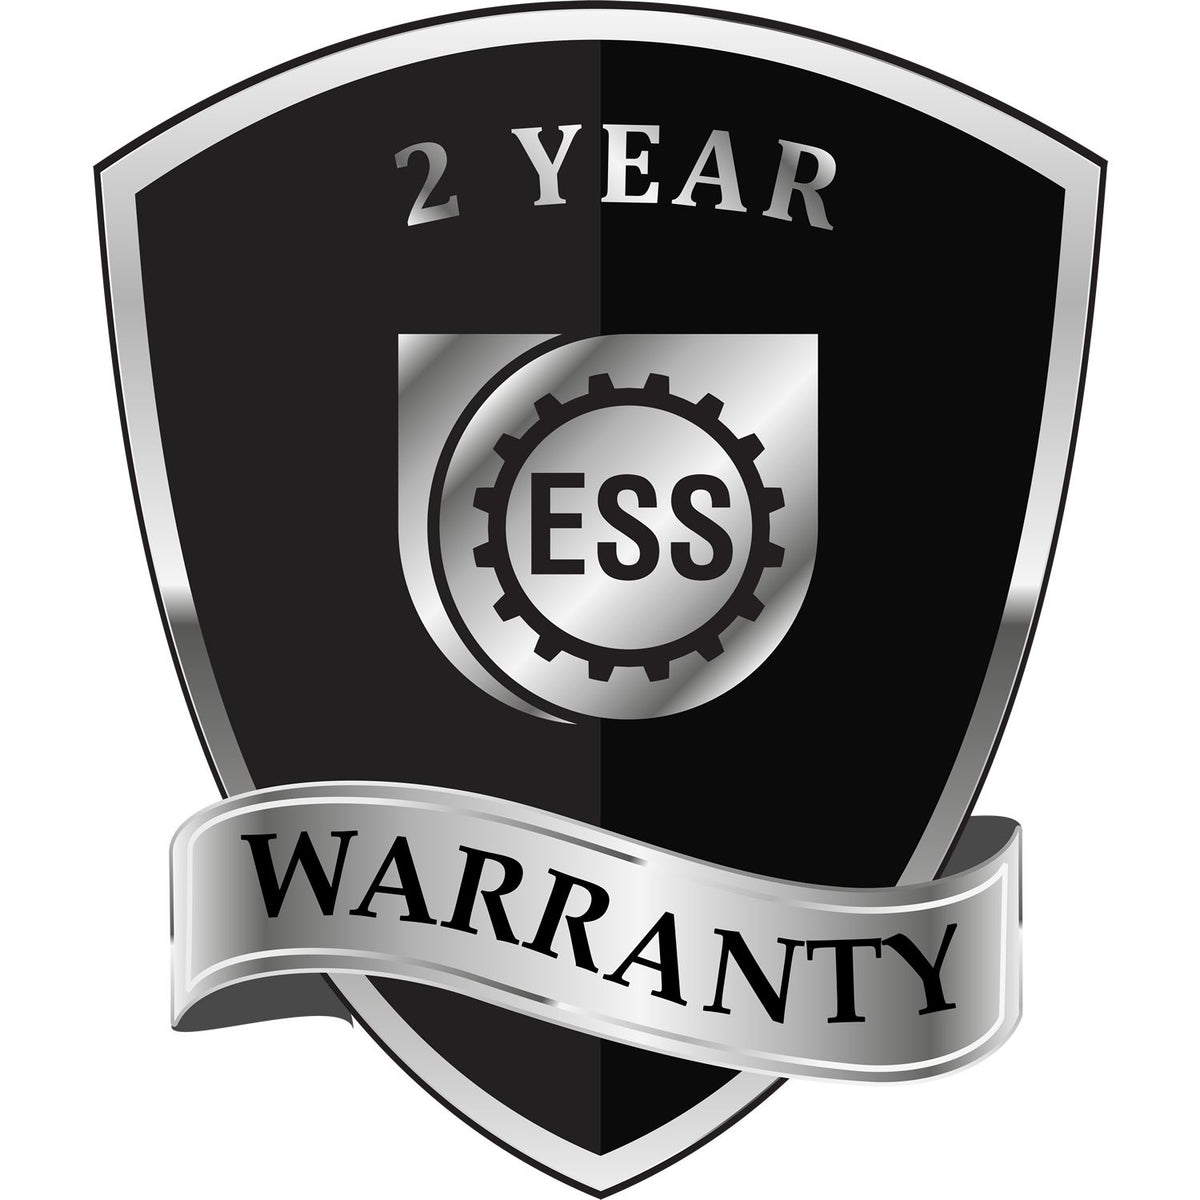 A black and silver badge or emblem showing warranty information for the Hybrid Michigan Landscape Architect Seal